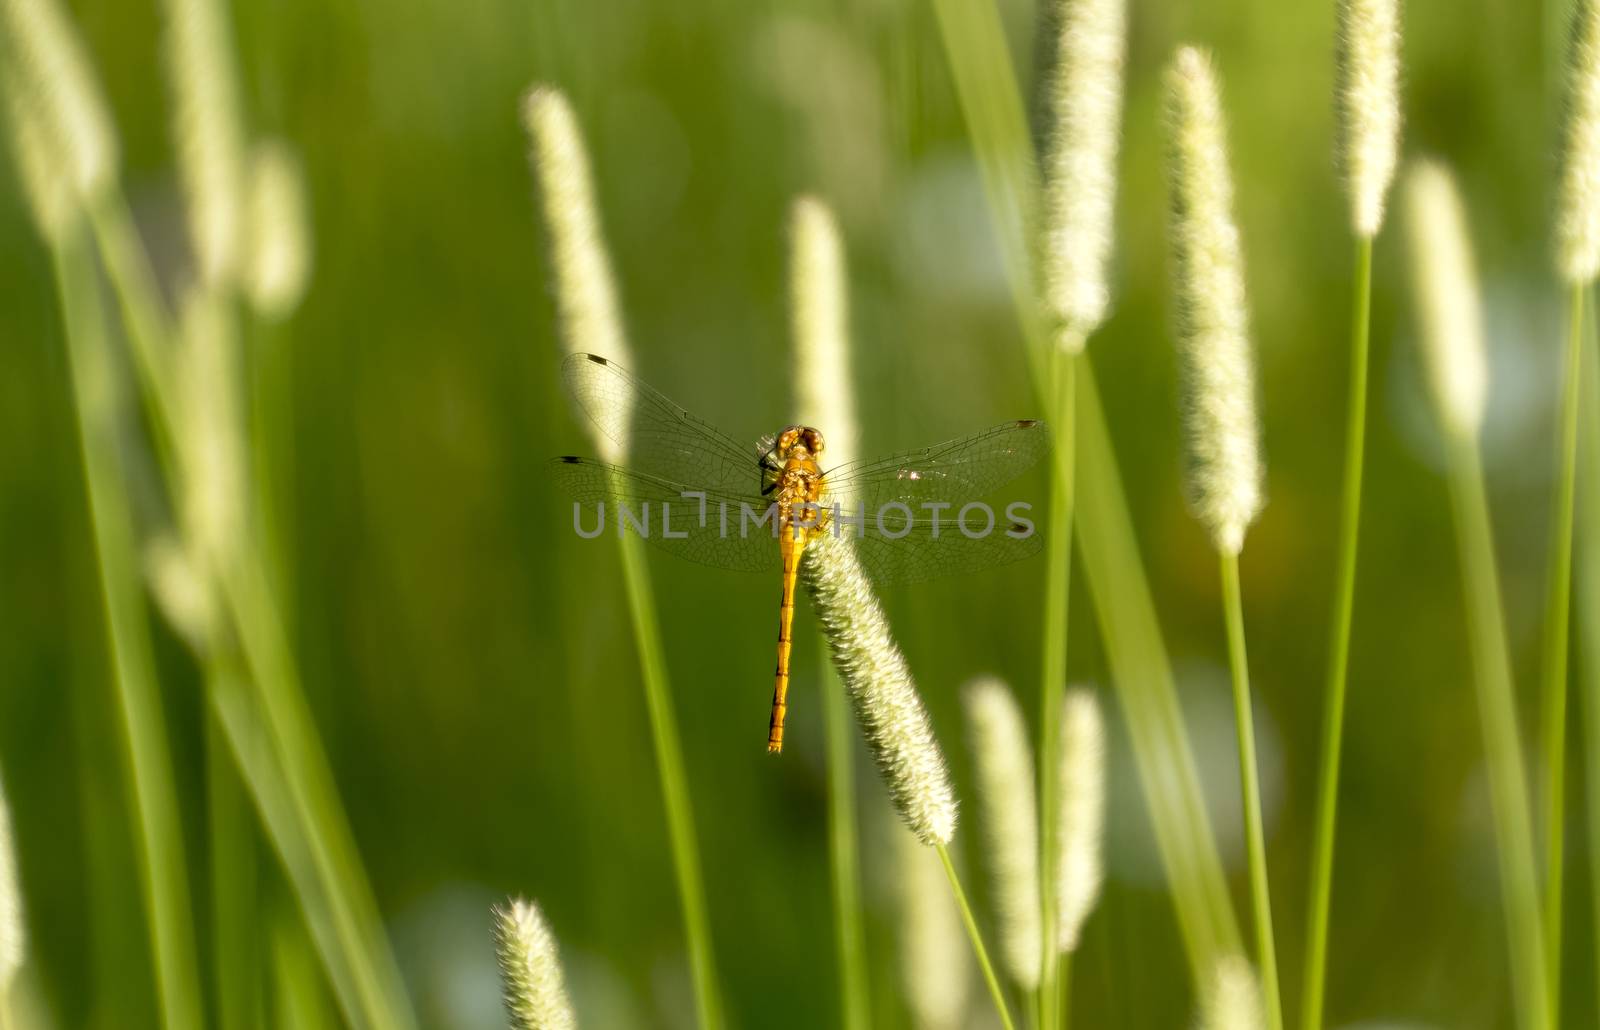 A dragonfly resting on foxtail.